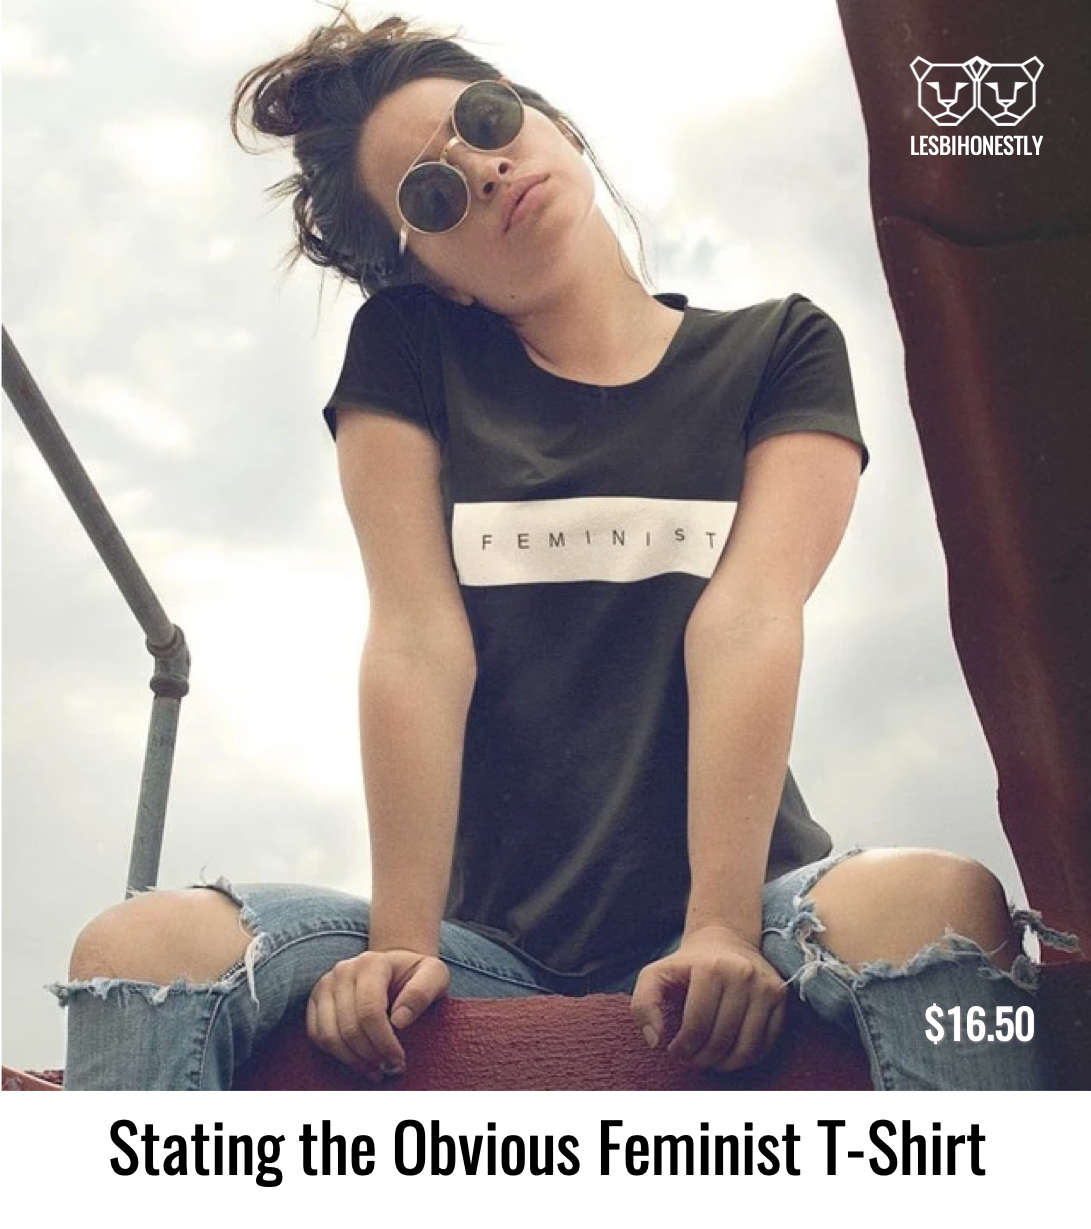 Stating the Obvious Feminist T-Shirt